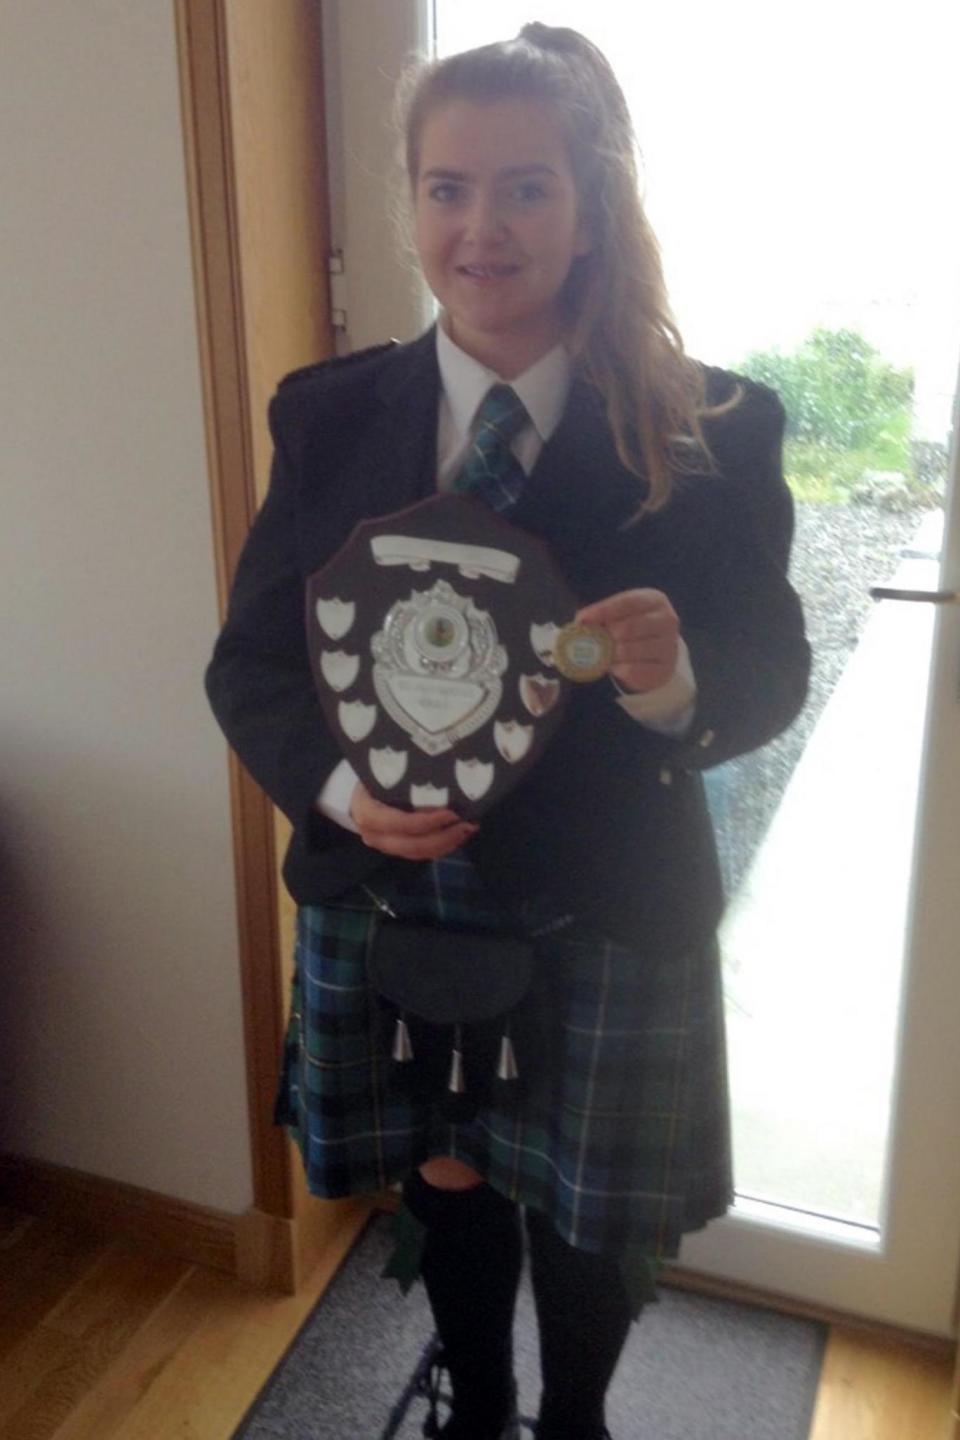 Proud: Eilidh posing with a bagpiping award (PA)